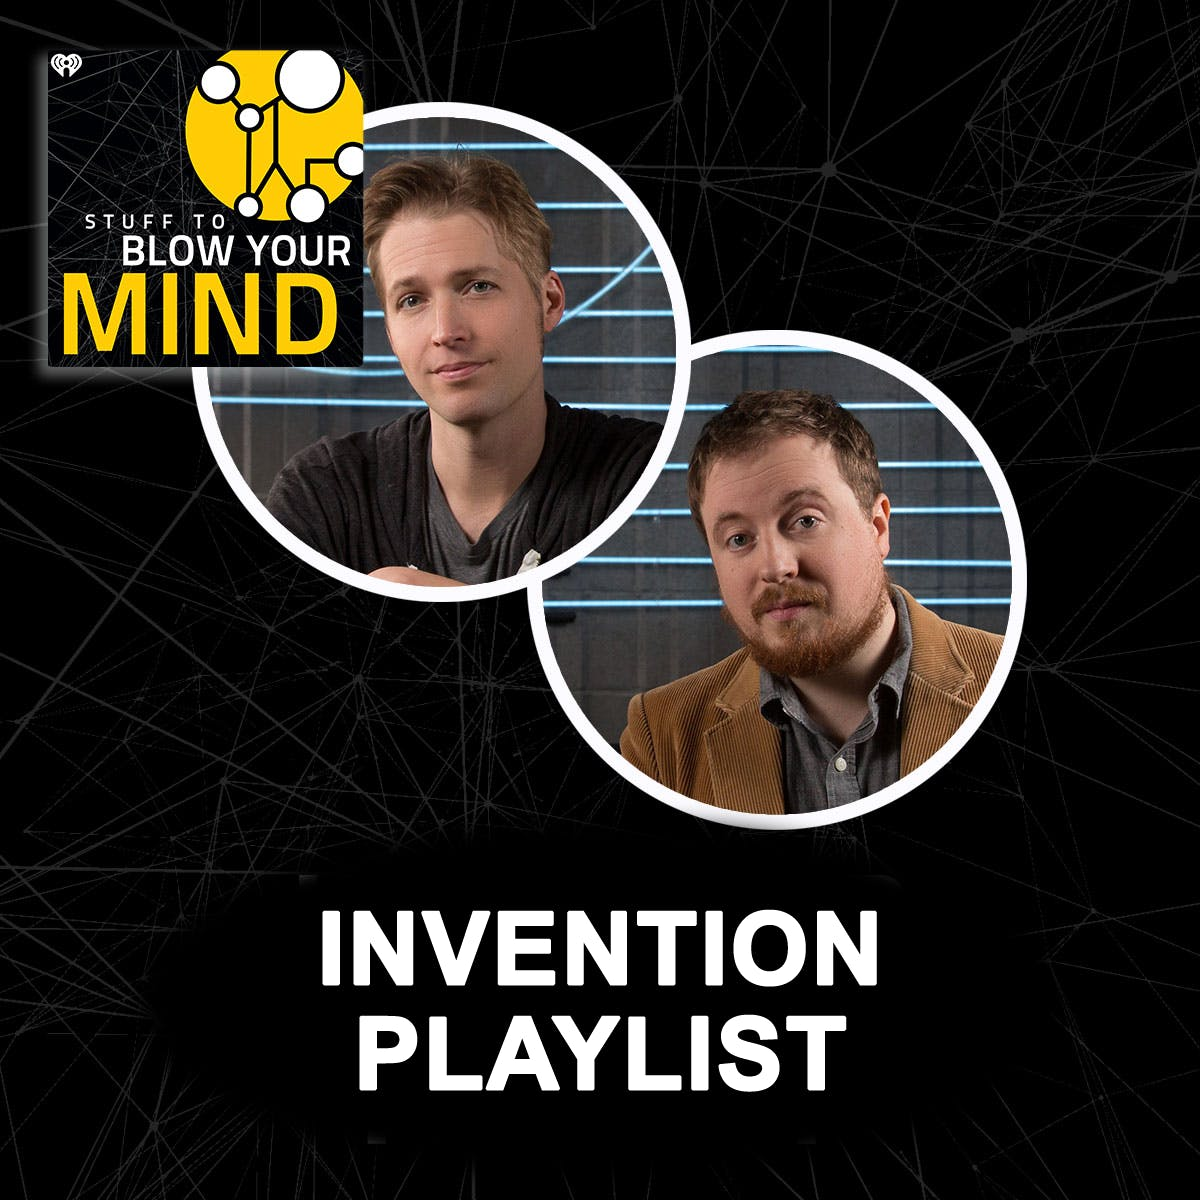 Invention Playlist: A Motion Picture Mystery